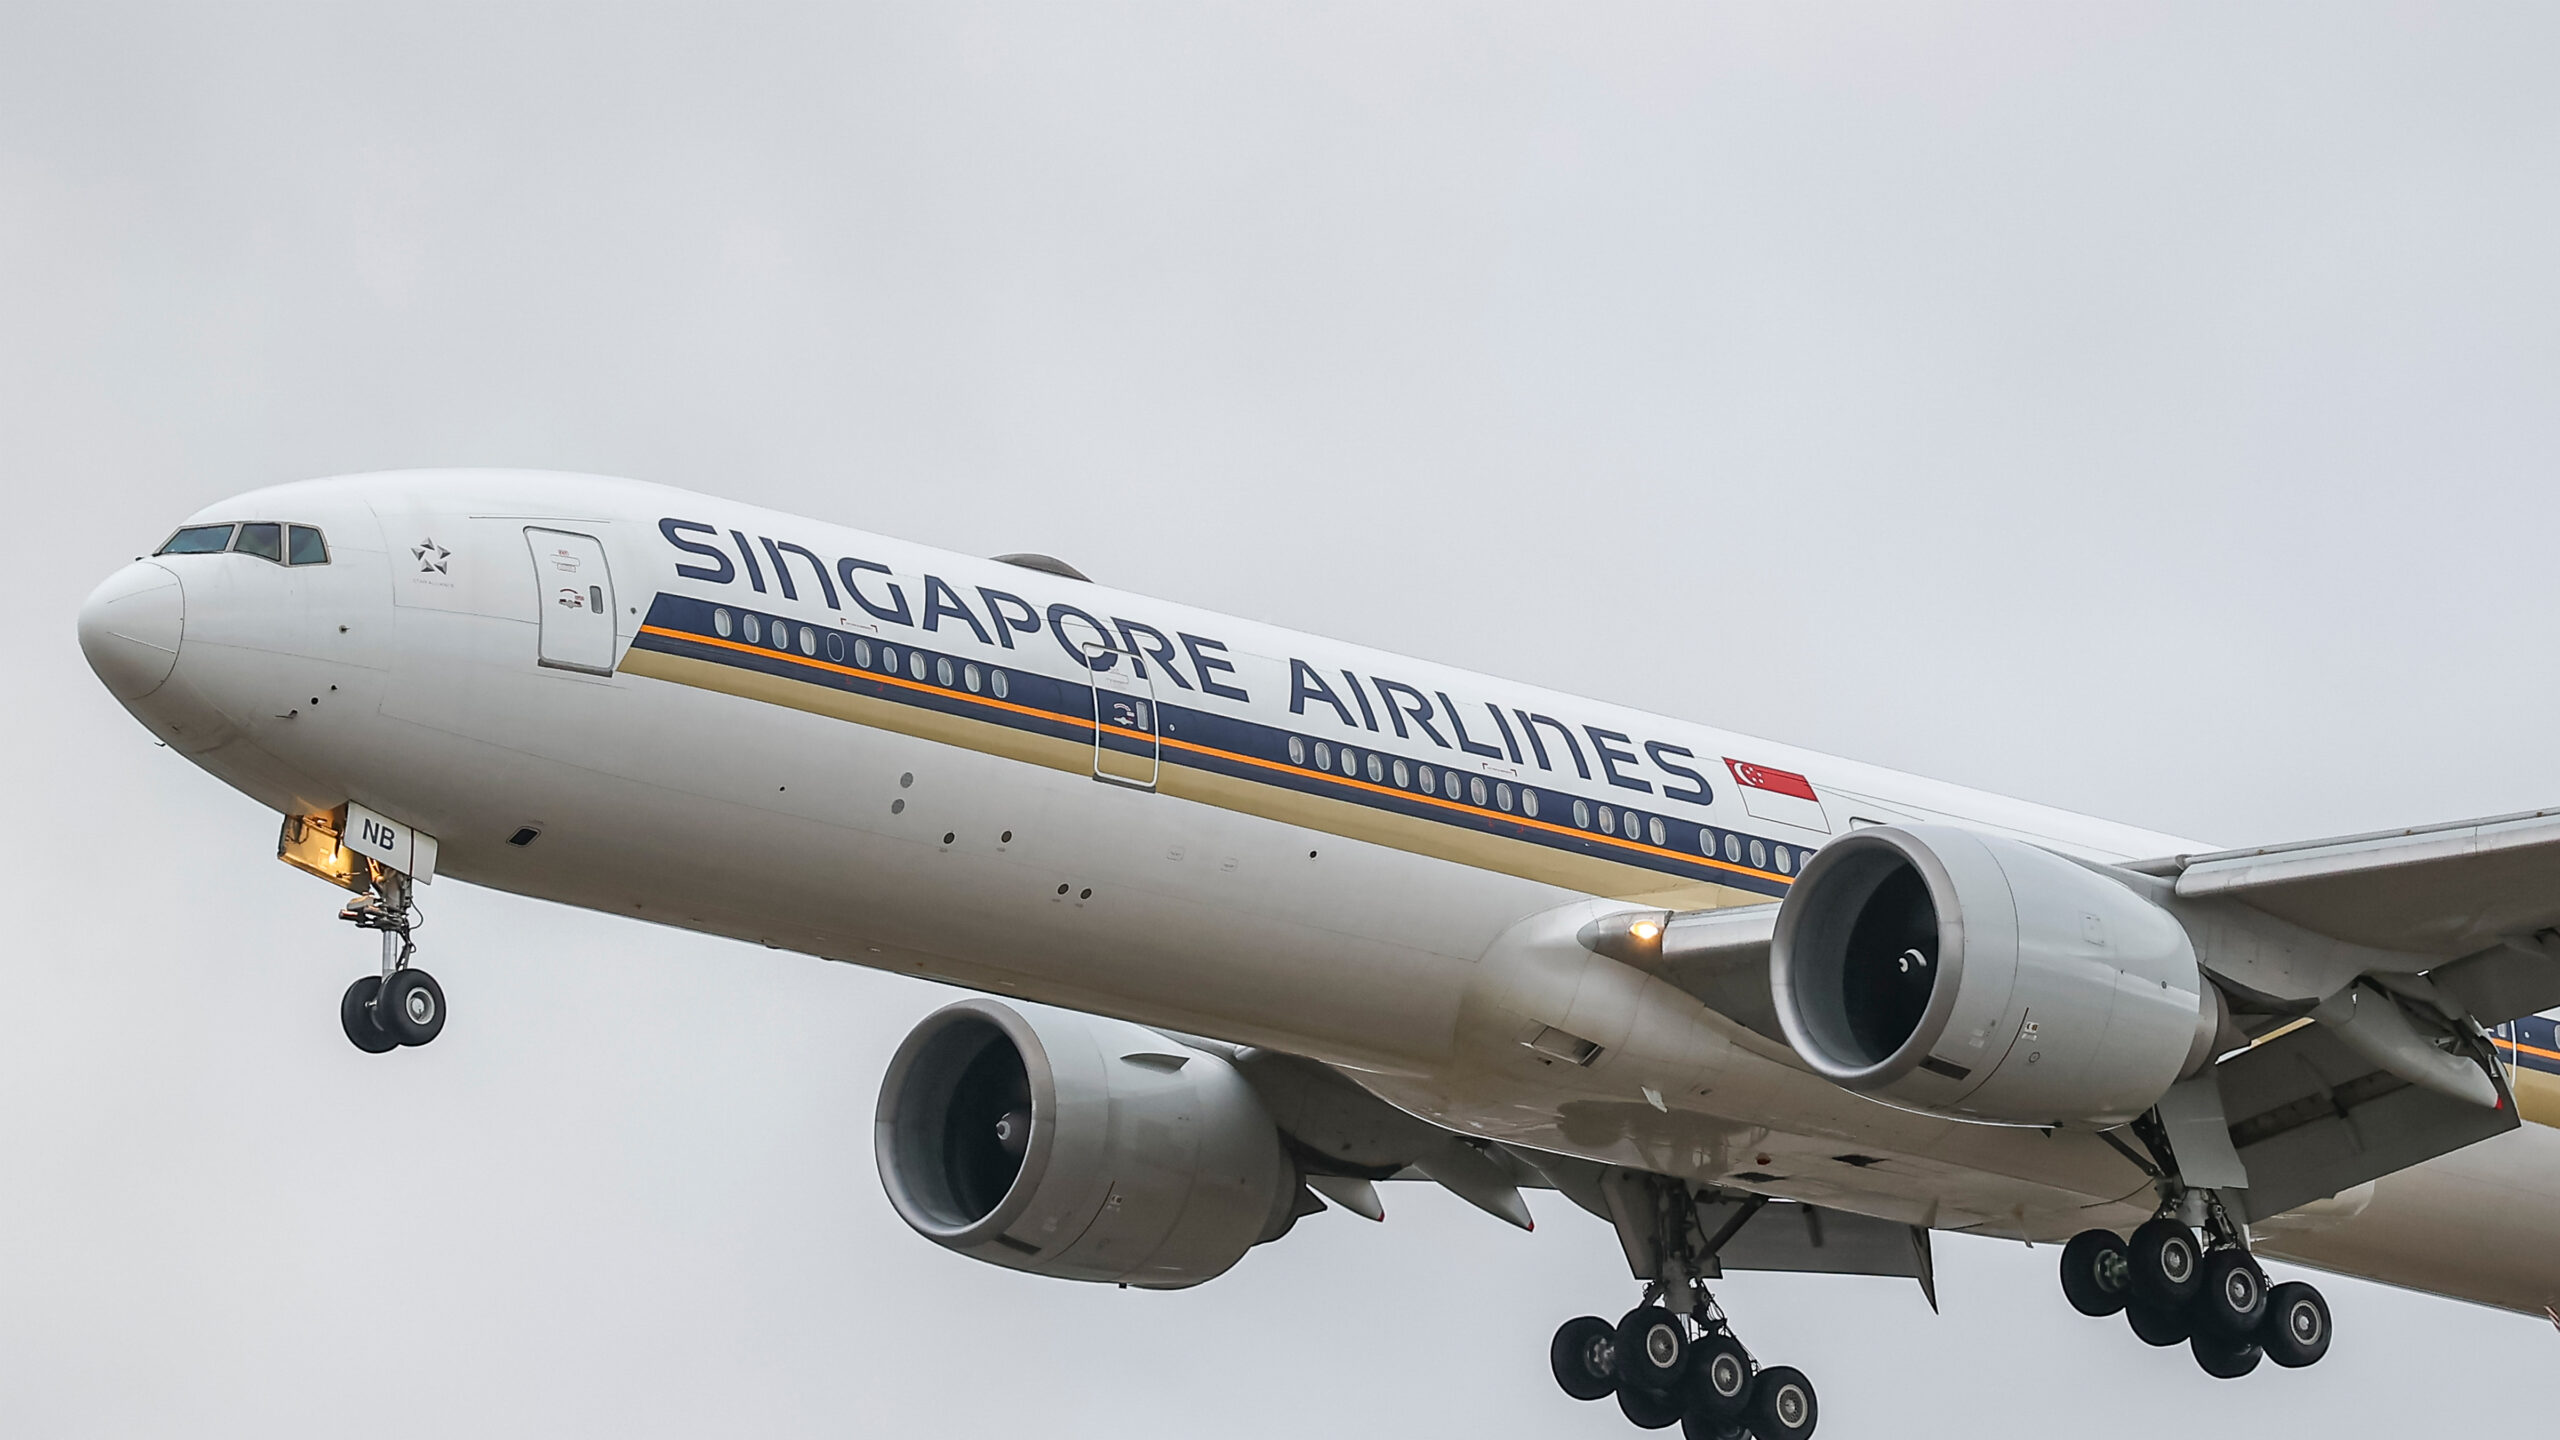 1-dead,-others-injured-after-‘severe’-turbulence-on-singapore-airlines-flight,-carrier-says